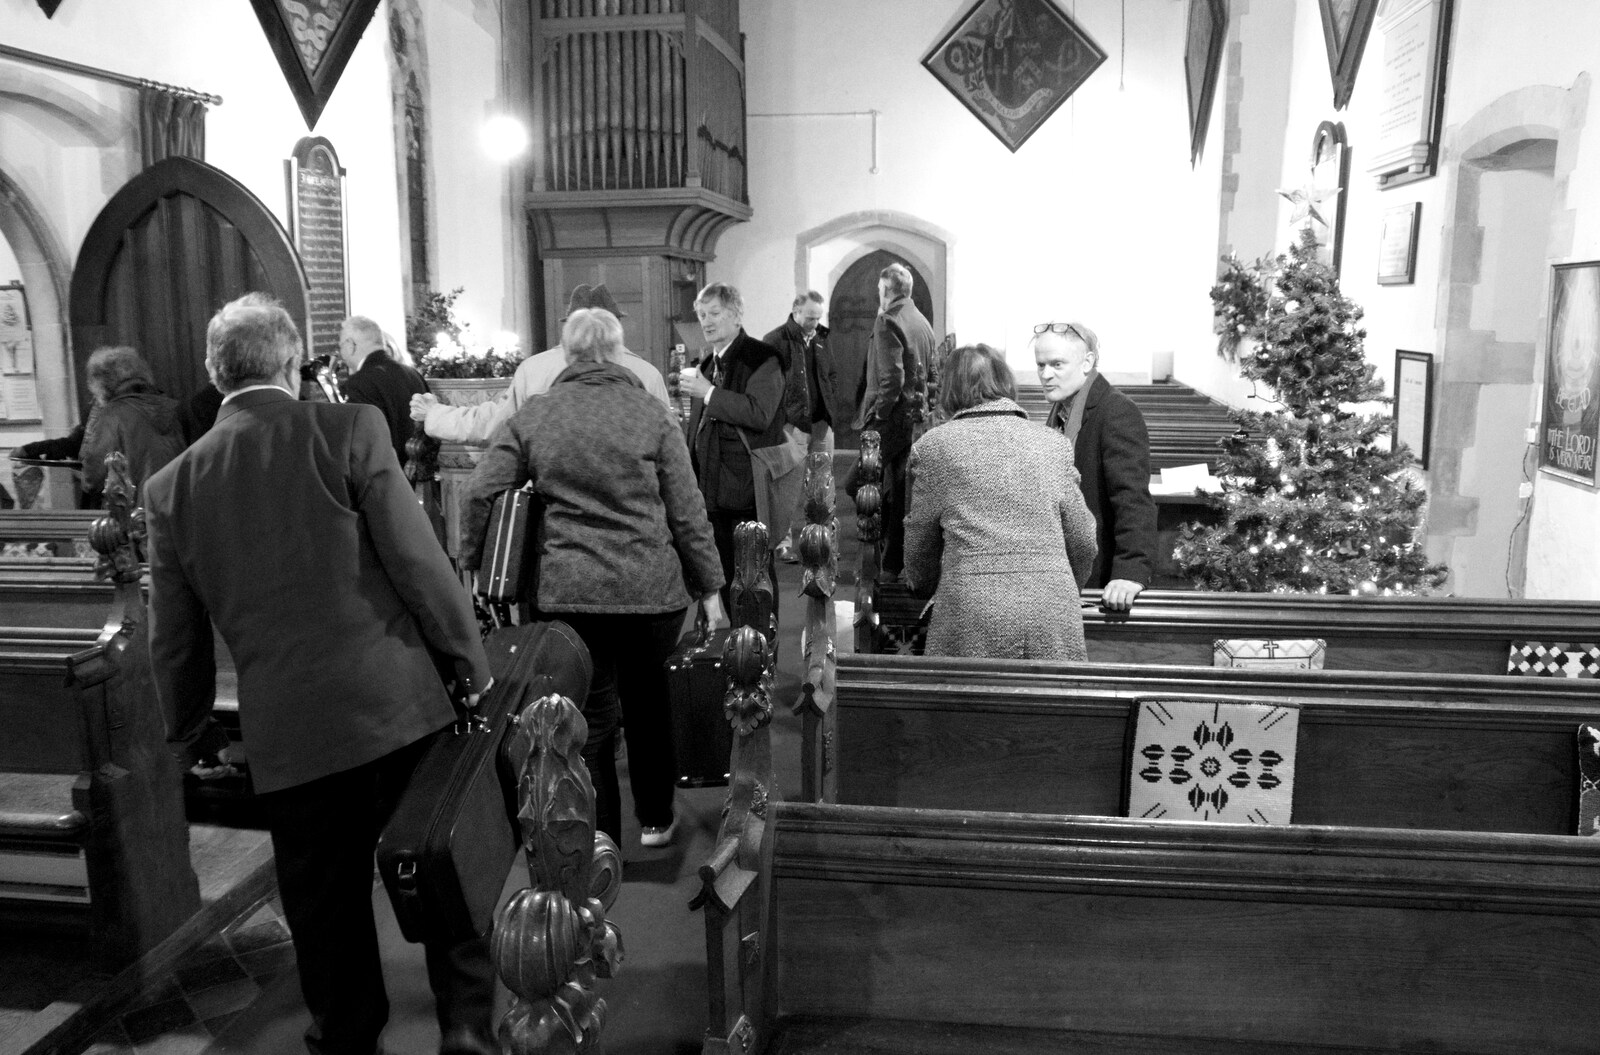 The band exits the church from The GSB at Thornham Magna and Yaxley Cherry Tree, Suffolk - 15th December 2019